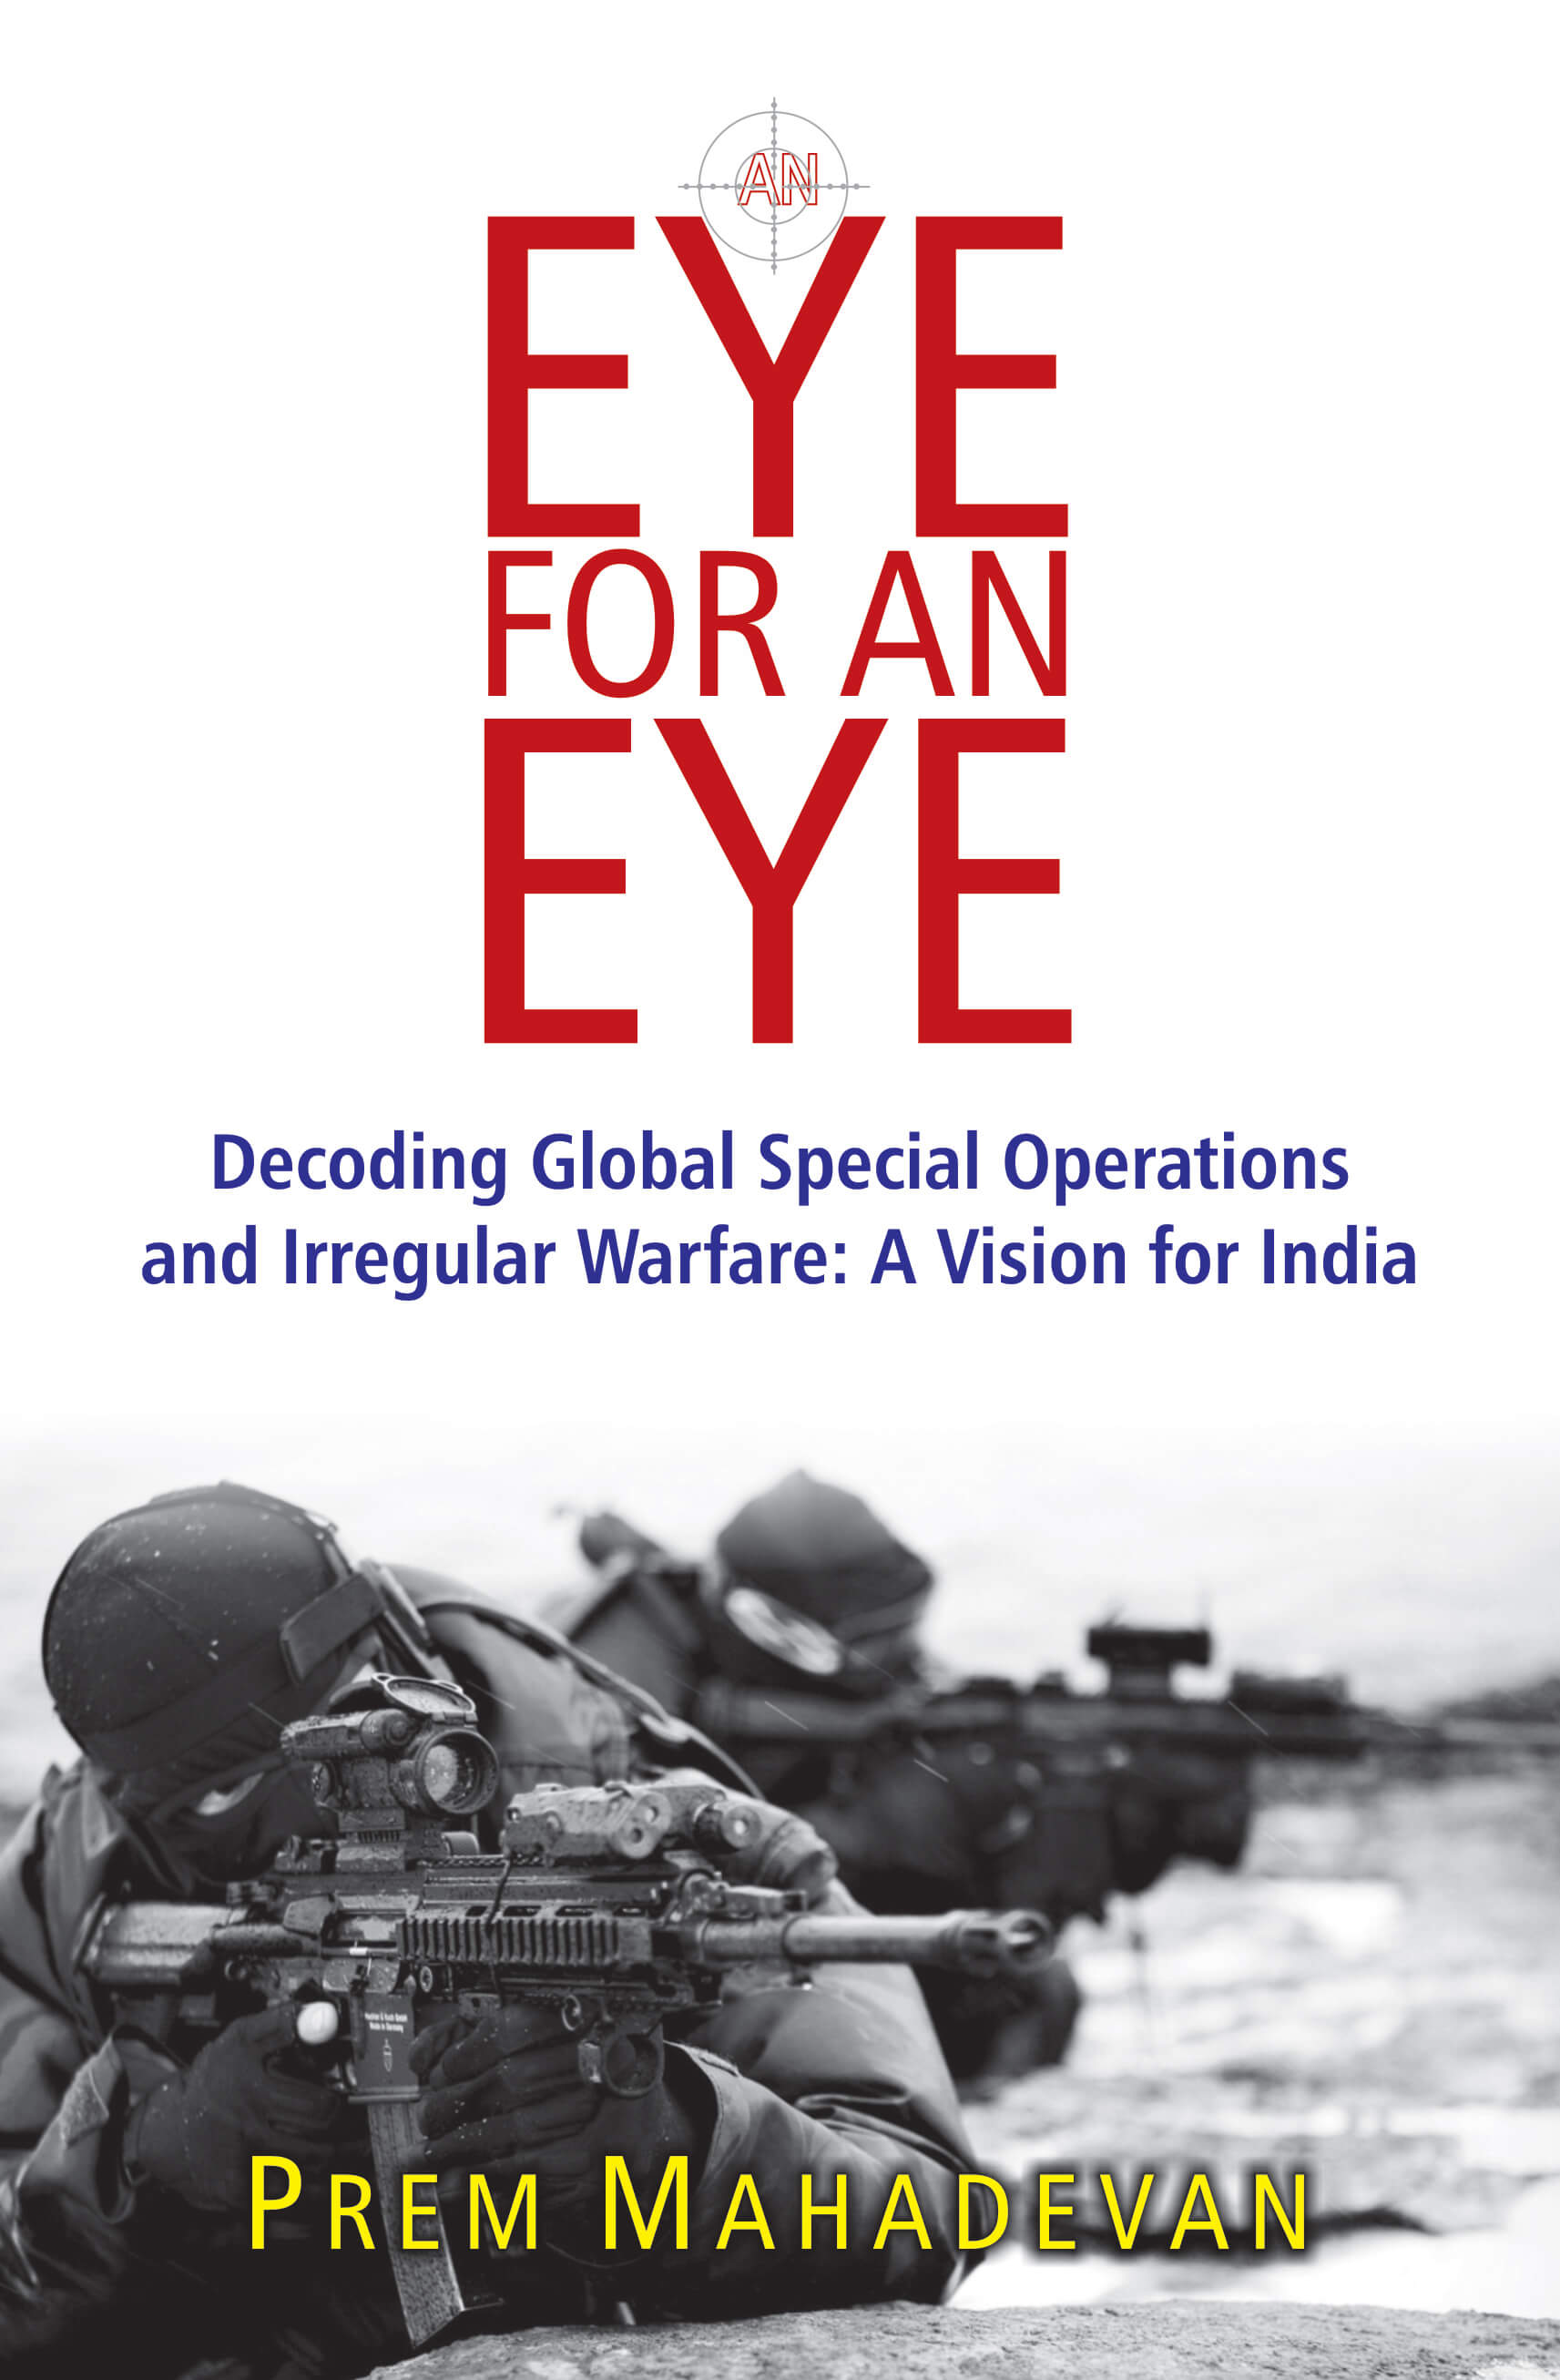 An Eye For An Eye: Decoding Global Special Operations And Irregular Warfare - A Vision For India